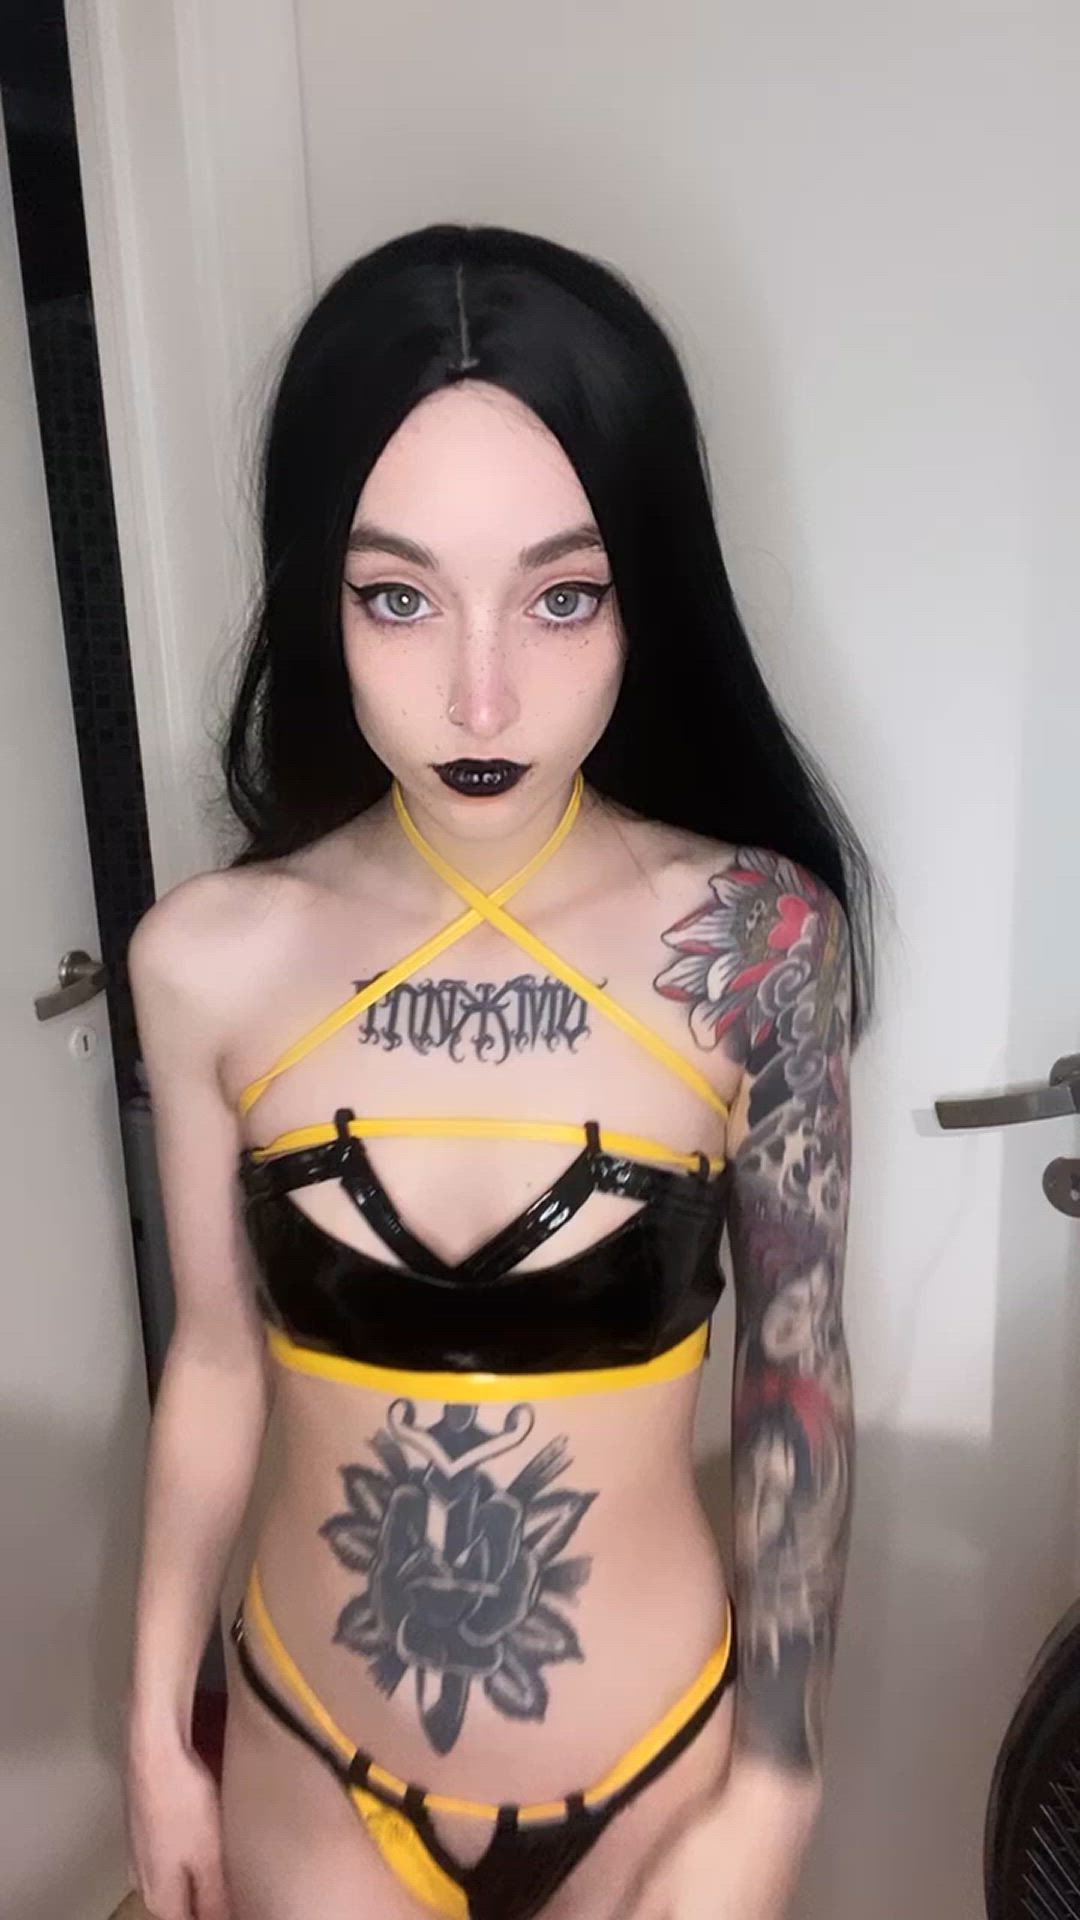 Ass porn video with onlyfans model willowx1 <strong>@willow_x1</strong>